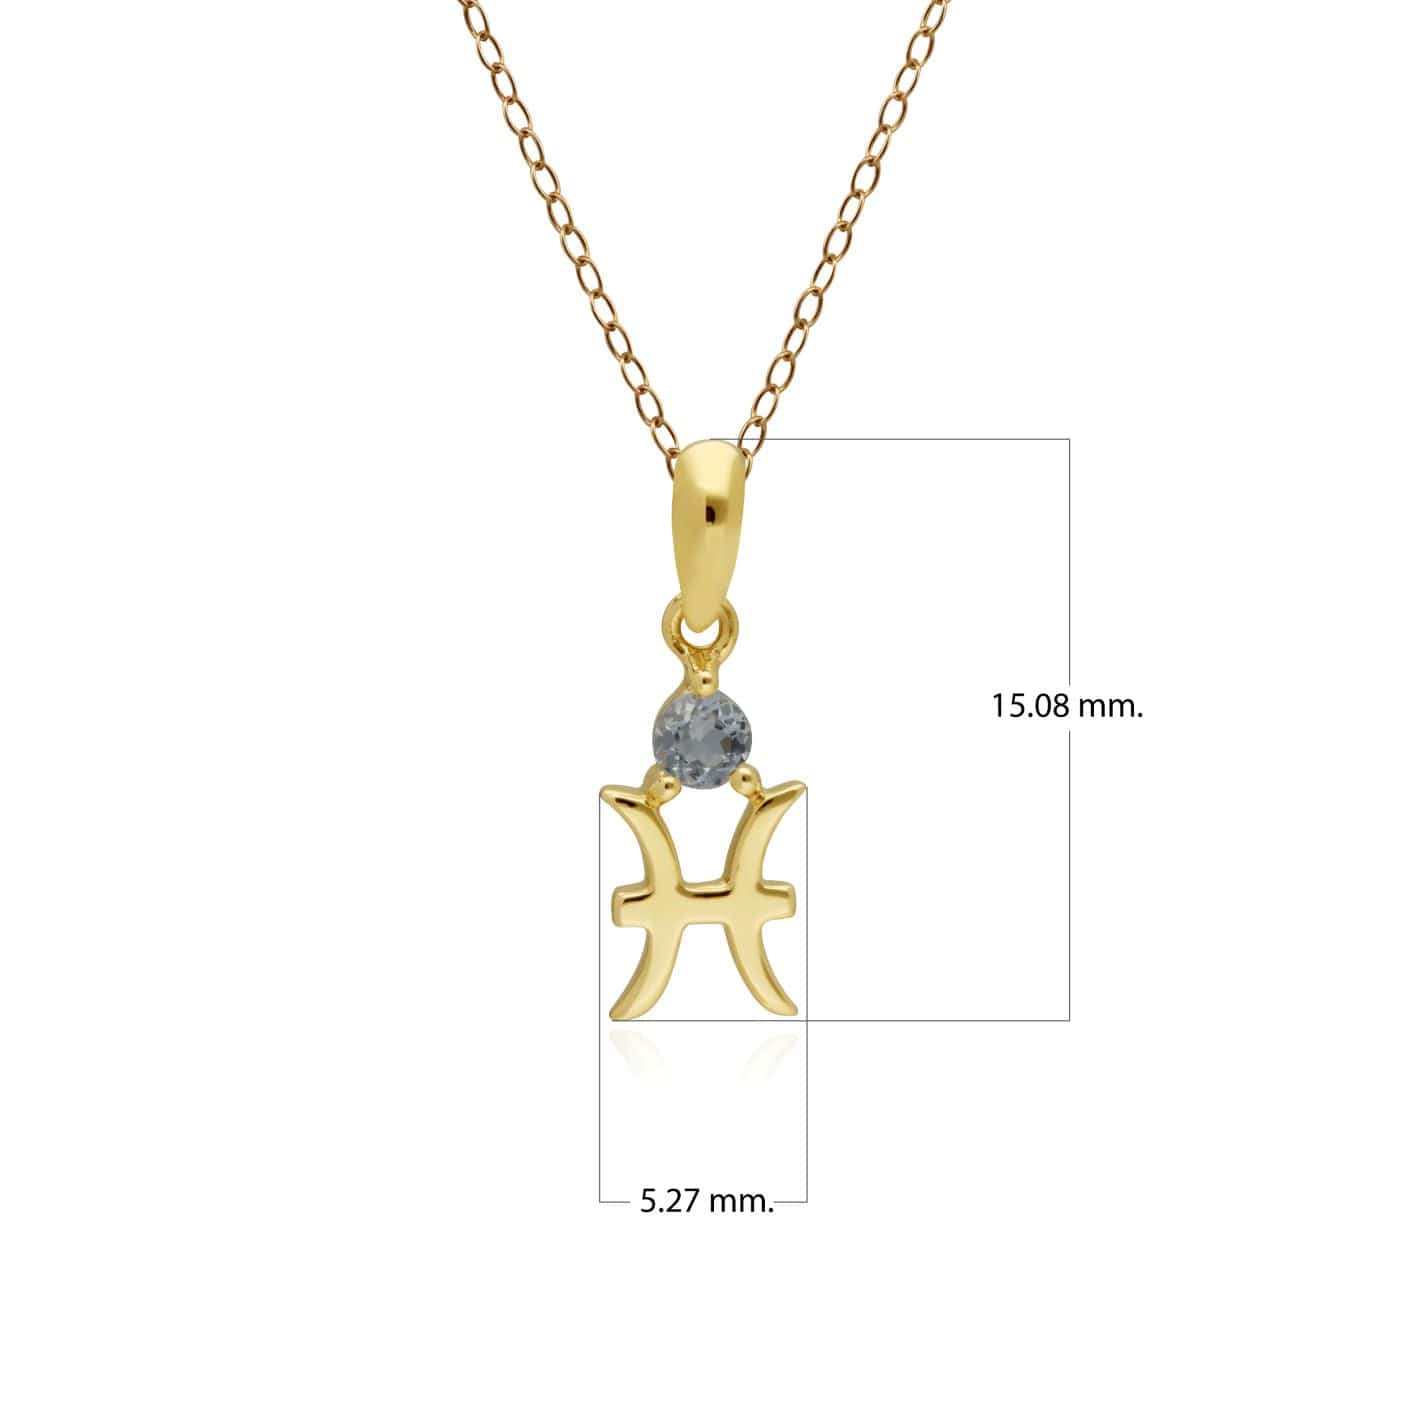 135P2006019 Aquamarine Pisces Zodiac Charm Necklace in 9ct Yellow Gold 3